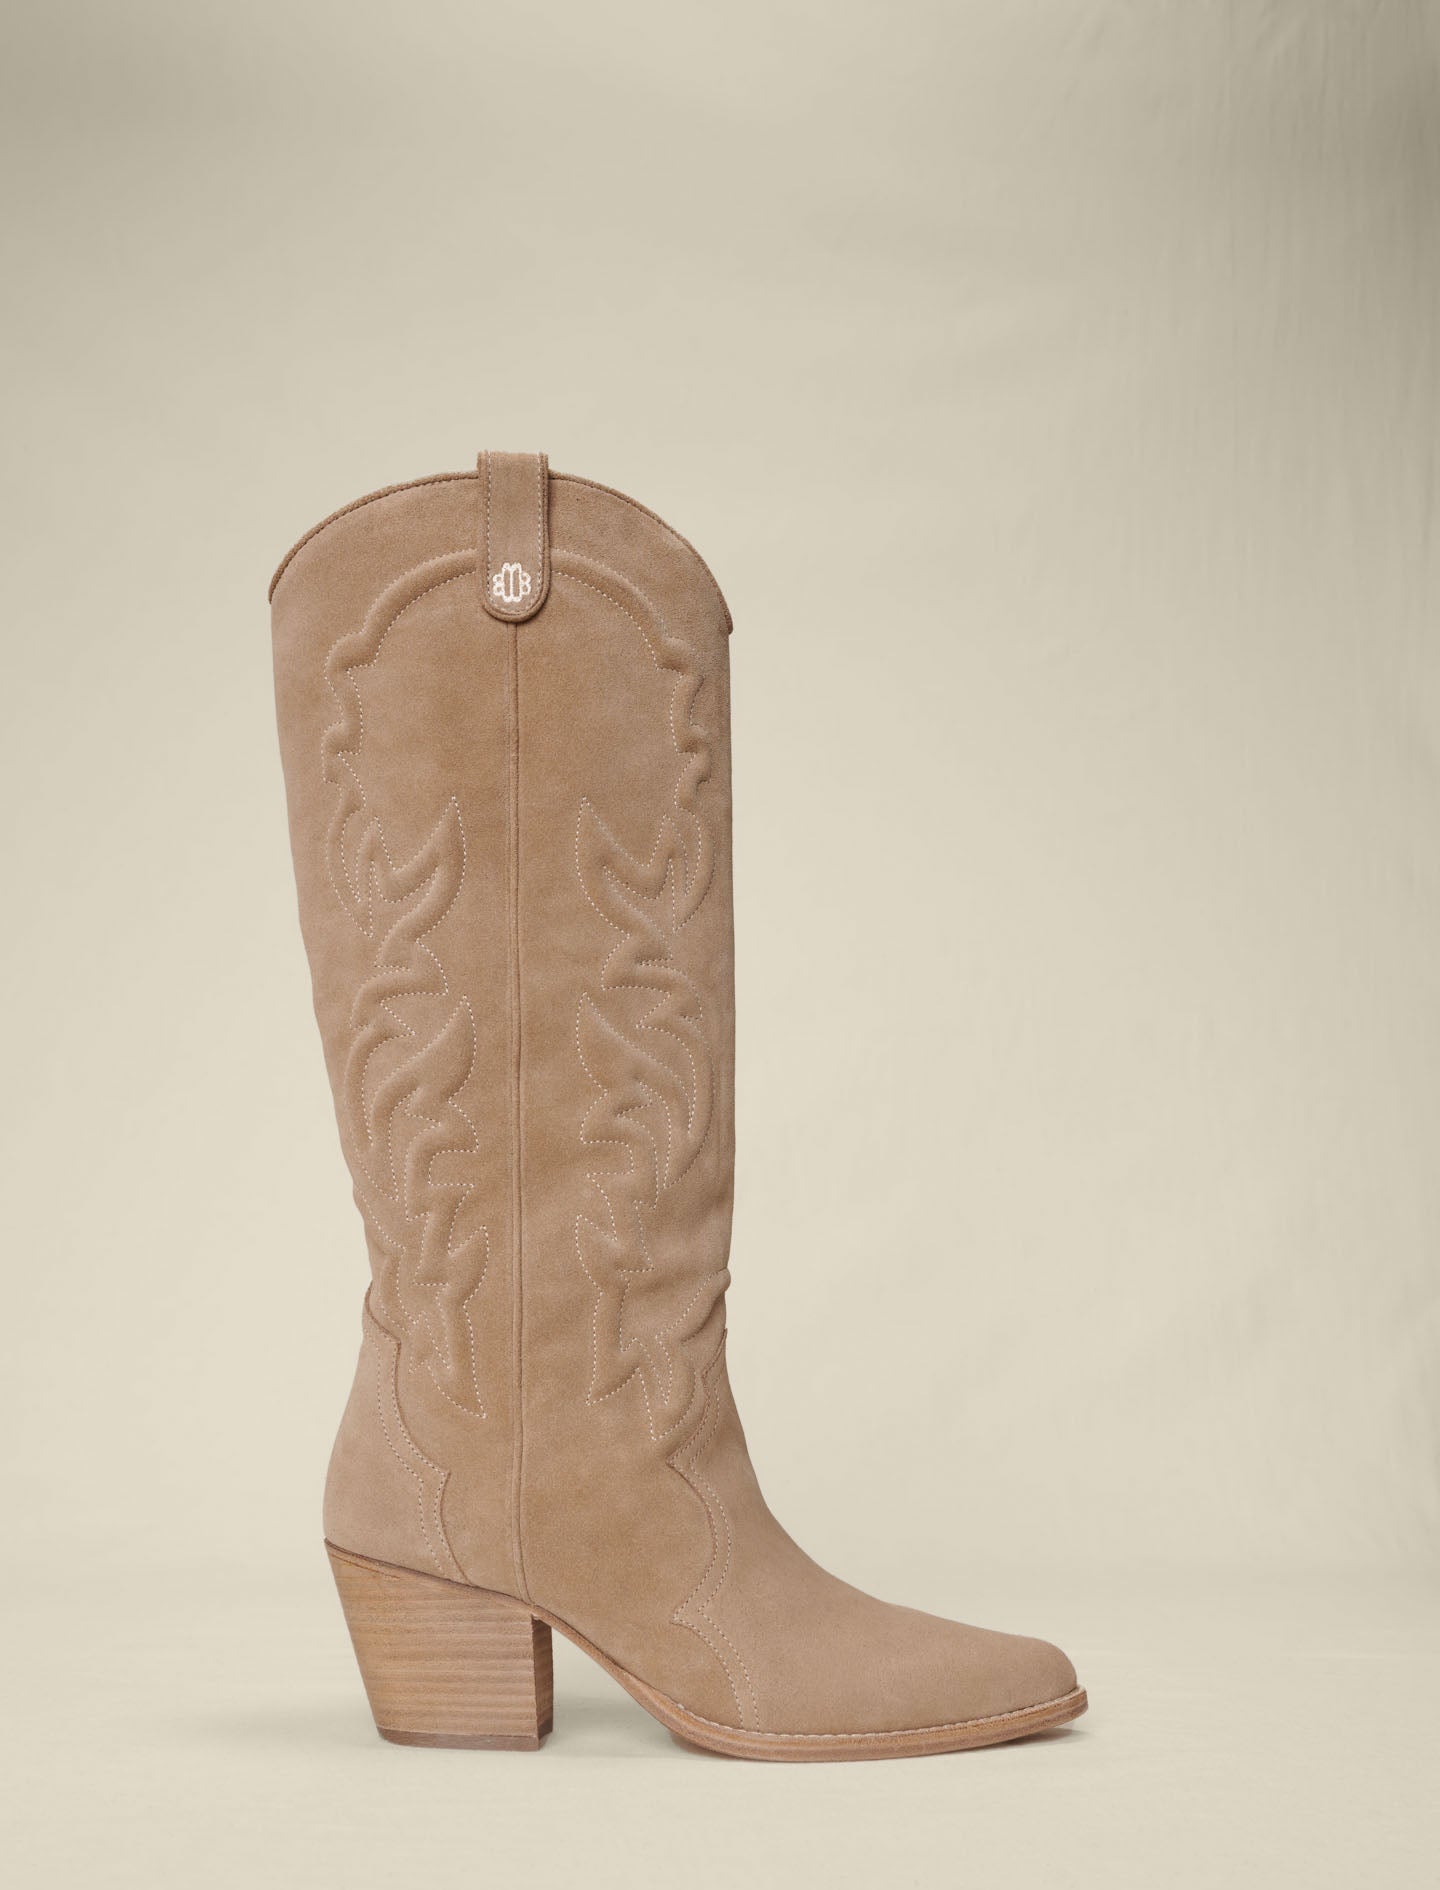 Beige featured EMBROIDERED LEATHER COWBOY BOOTS